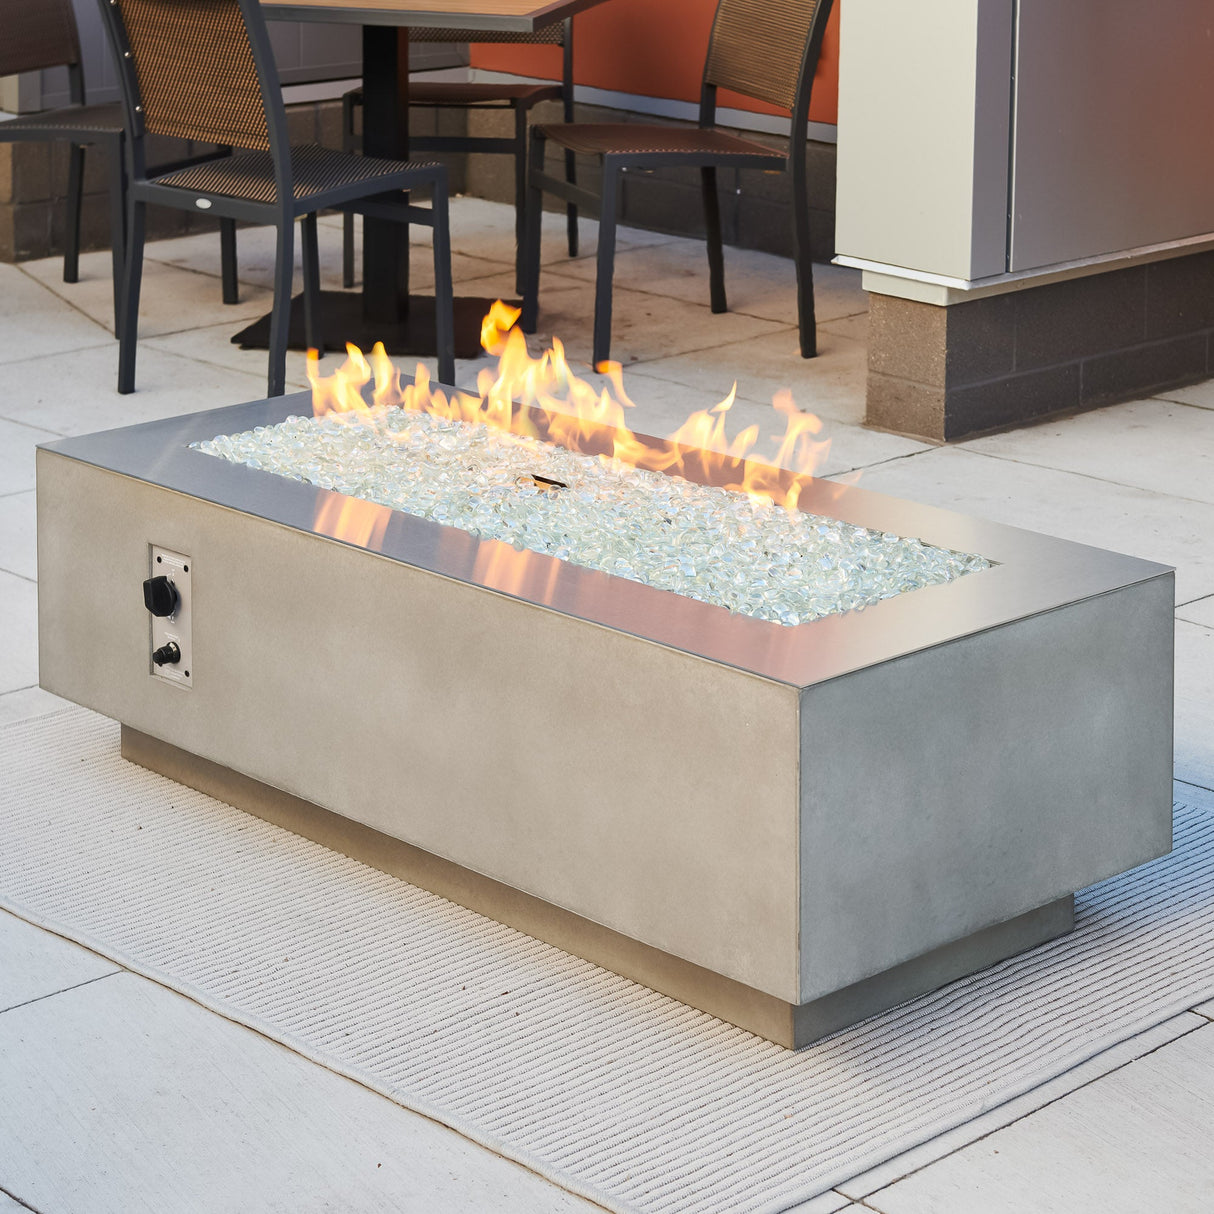 A Stainless Steel overlay placed on top of the Natural Grey Cove Linear Gas Fire Pit Table 54"